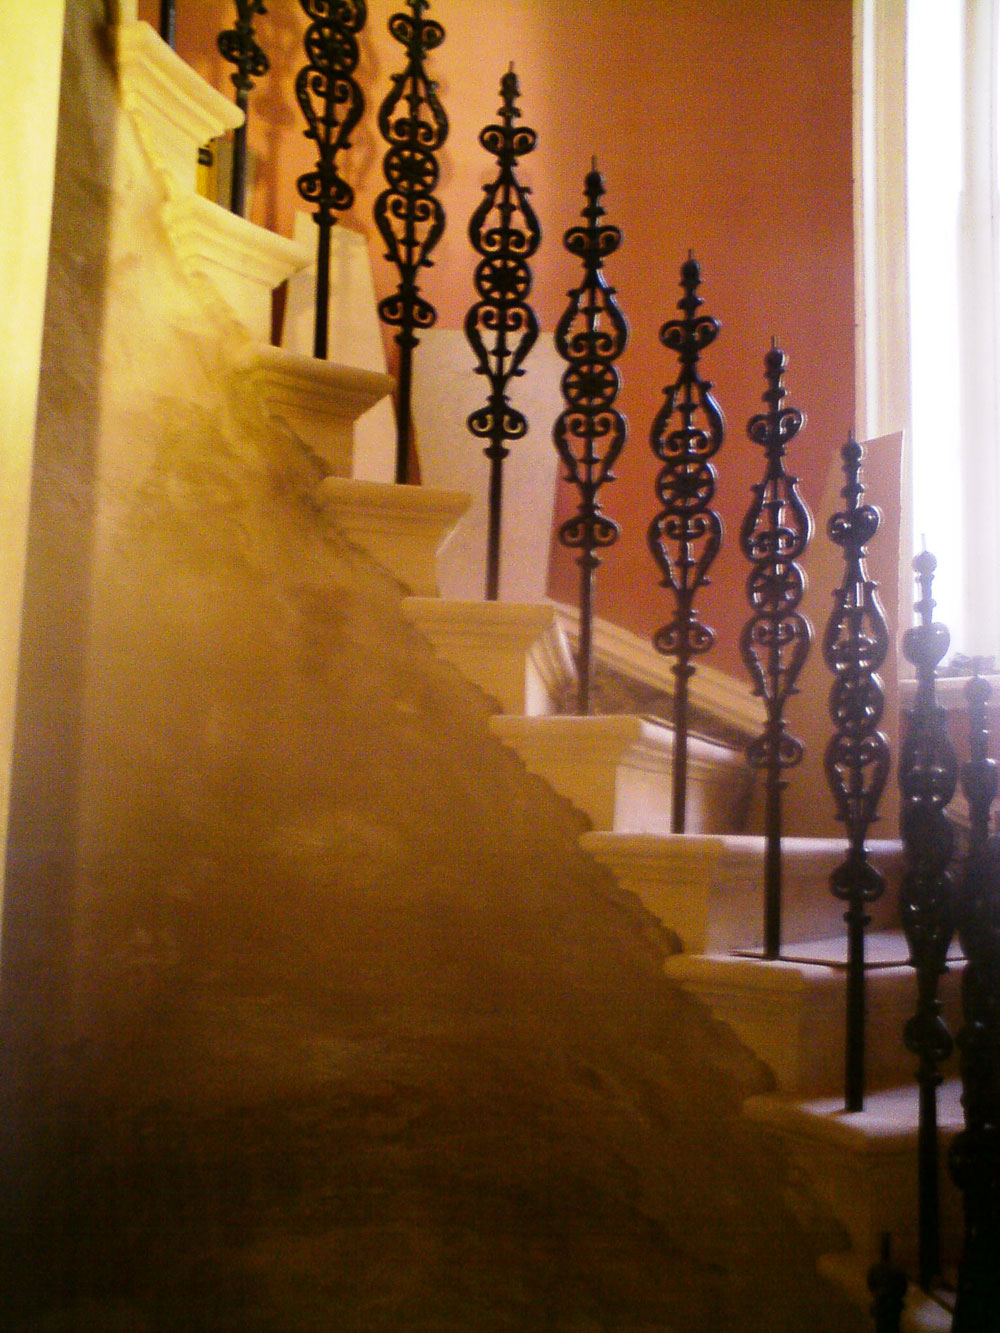 Stairway bannisters